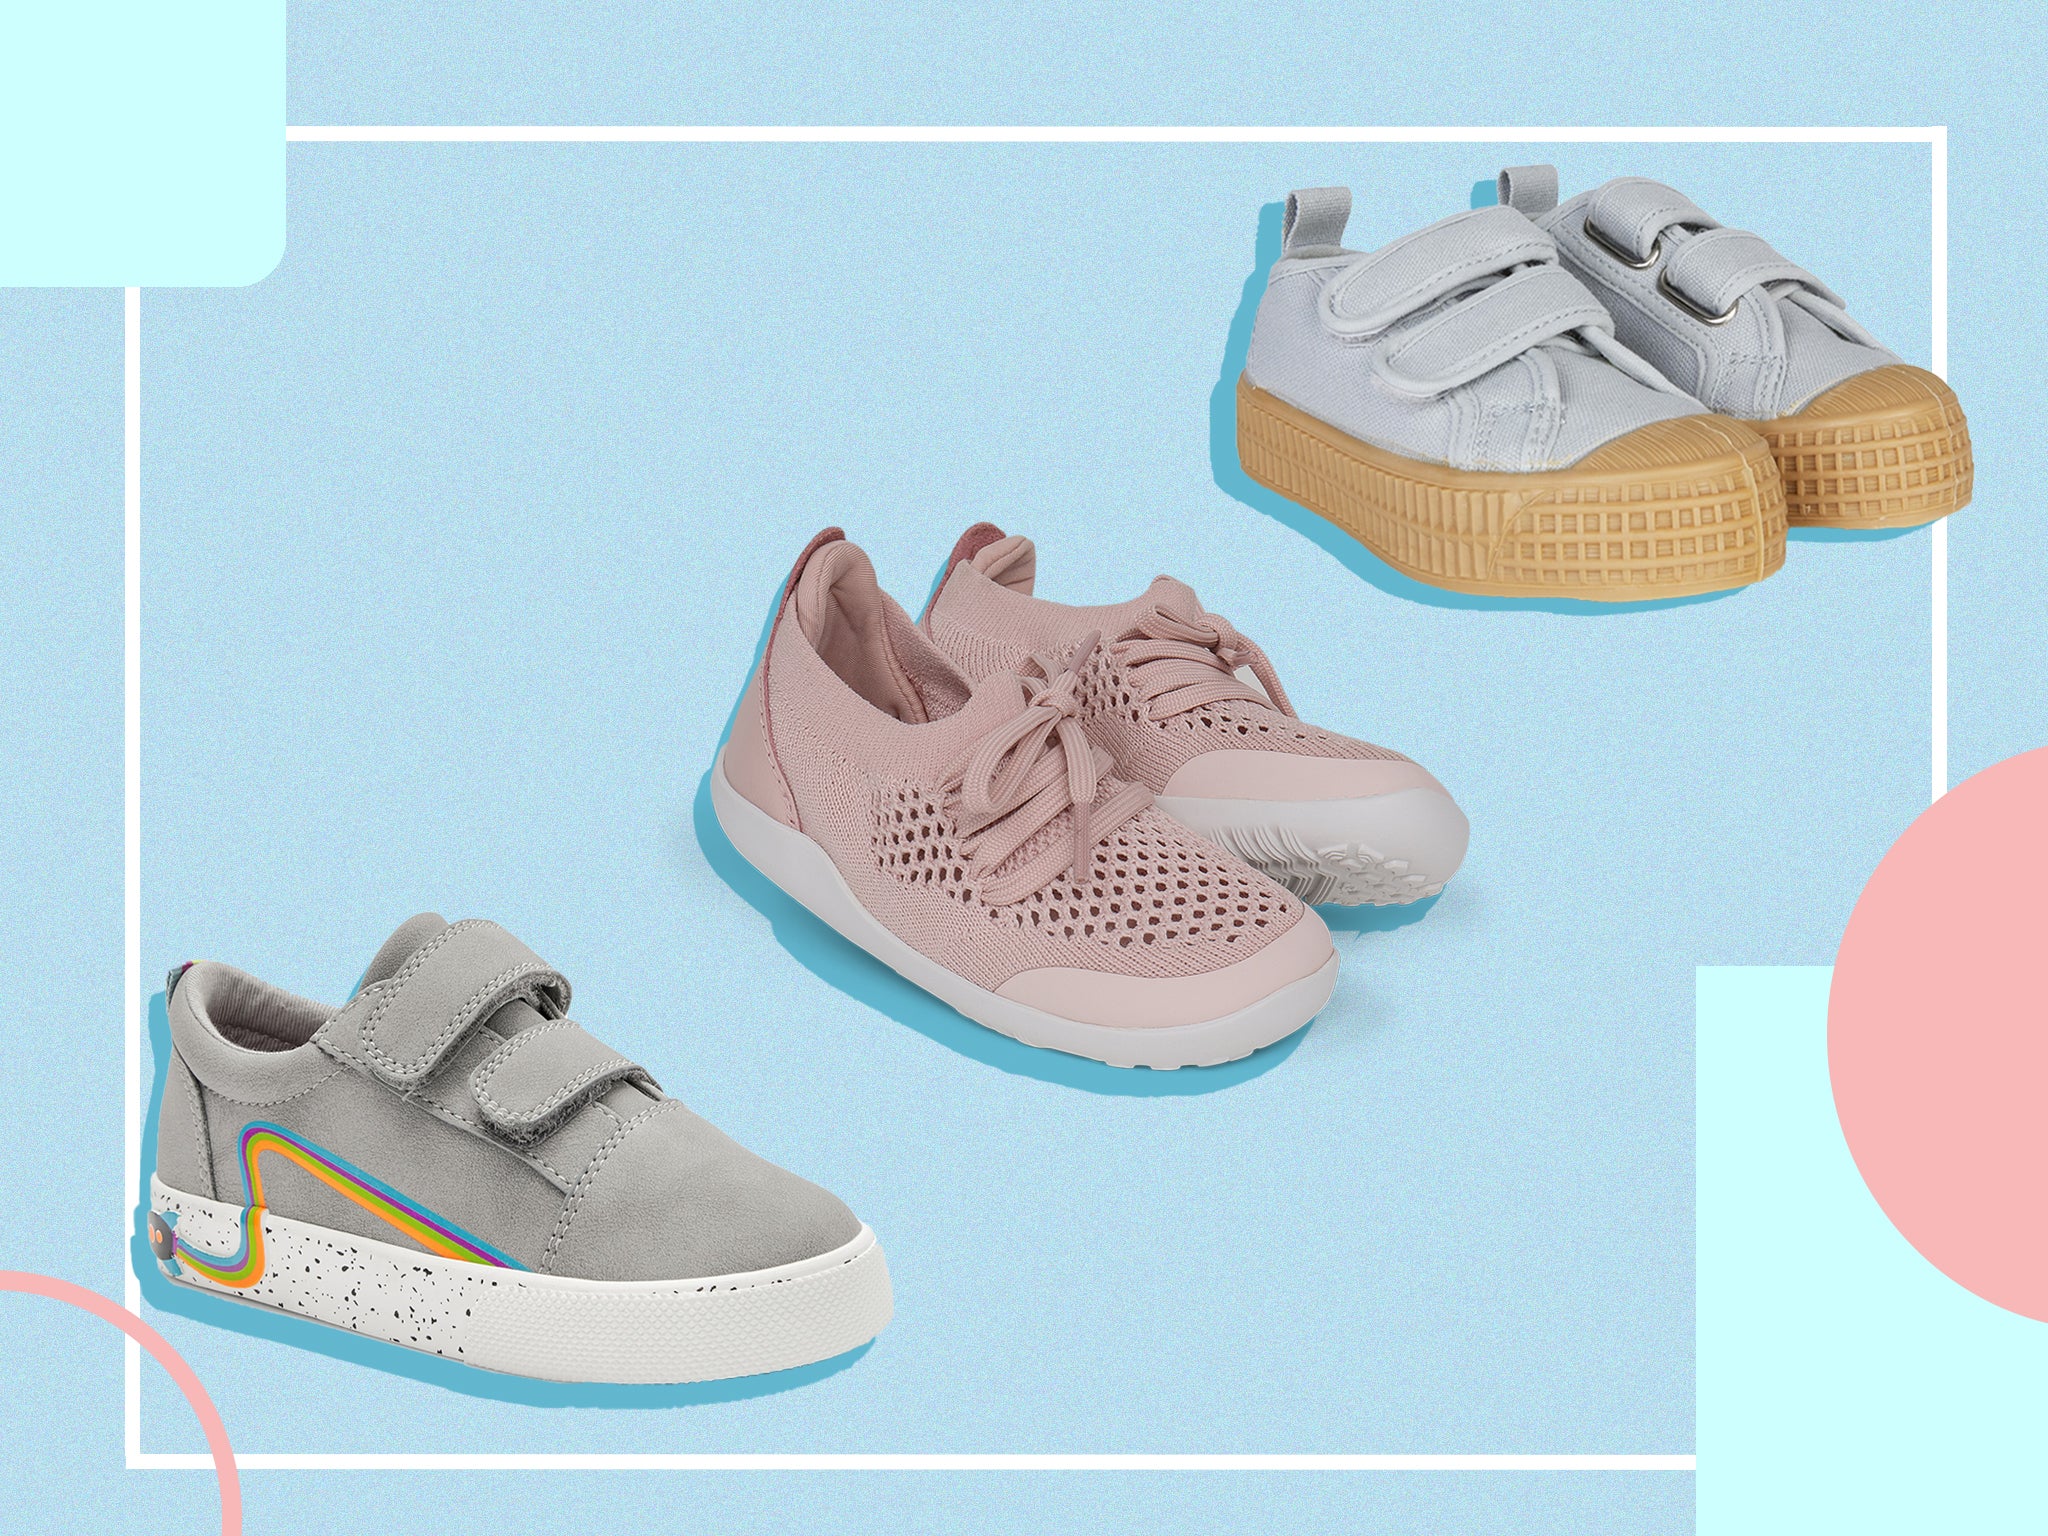 Best kids' trainers 2020: Velcro and 